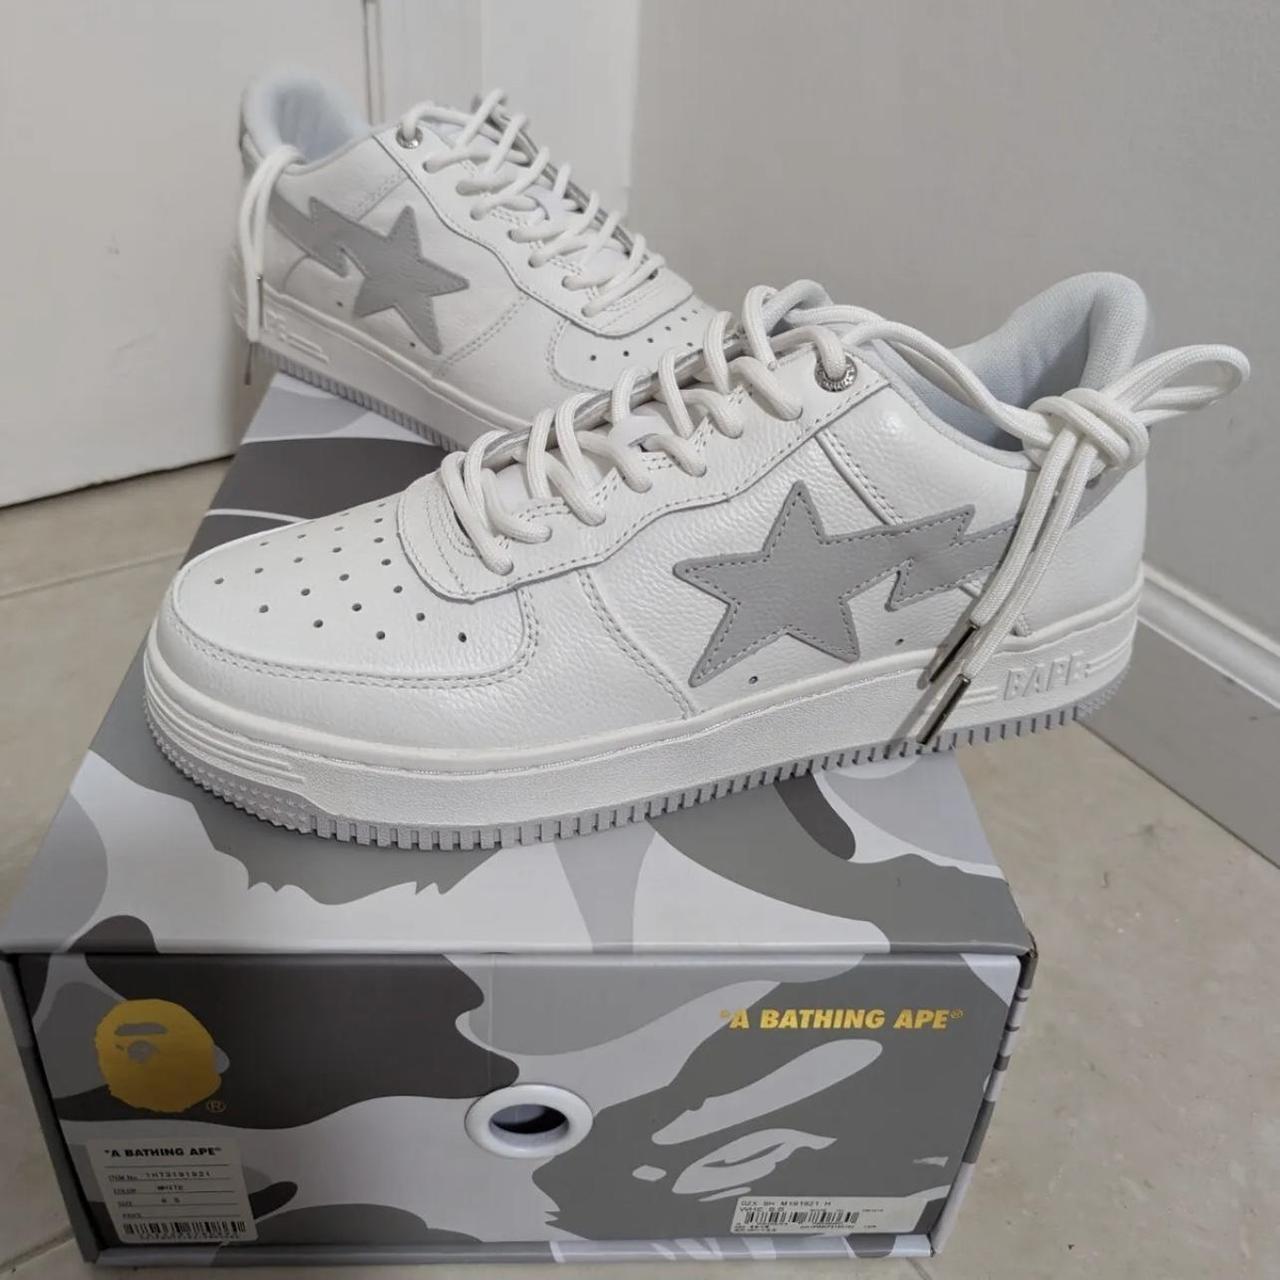 BAPE Men's Grey and White Trainers | Depop